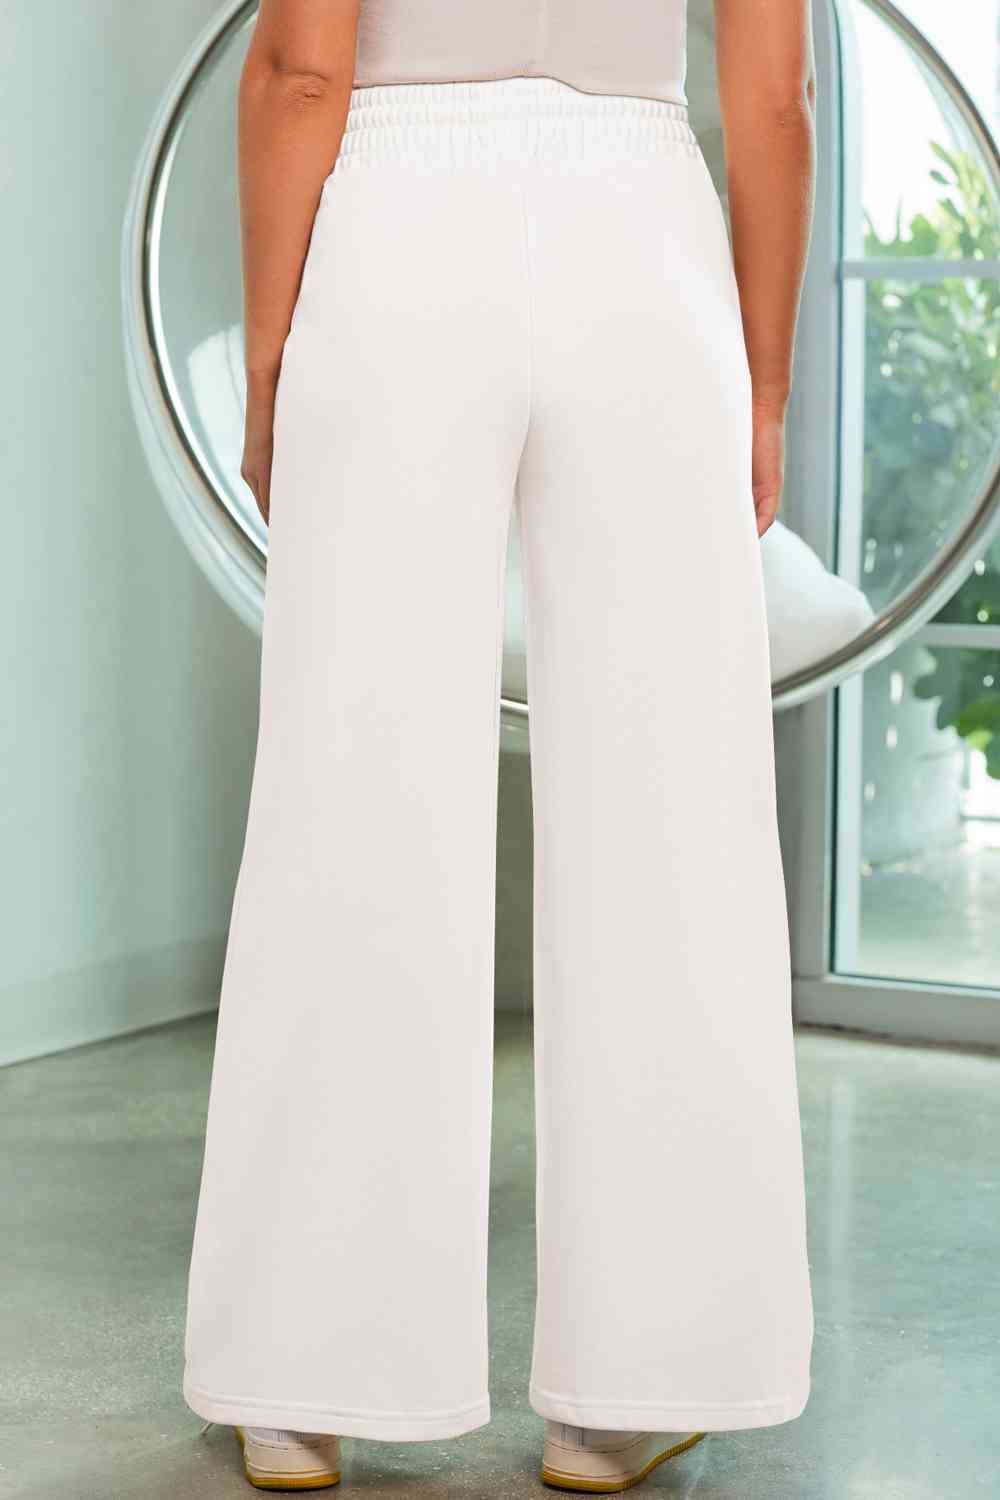 a woman in white pants standing in front of a mirror